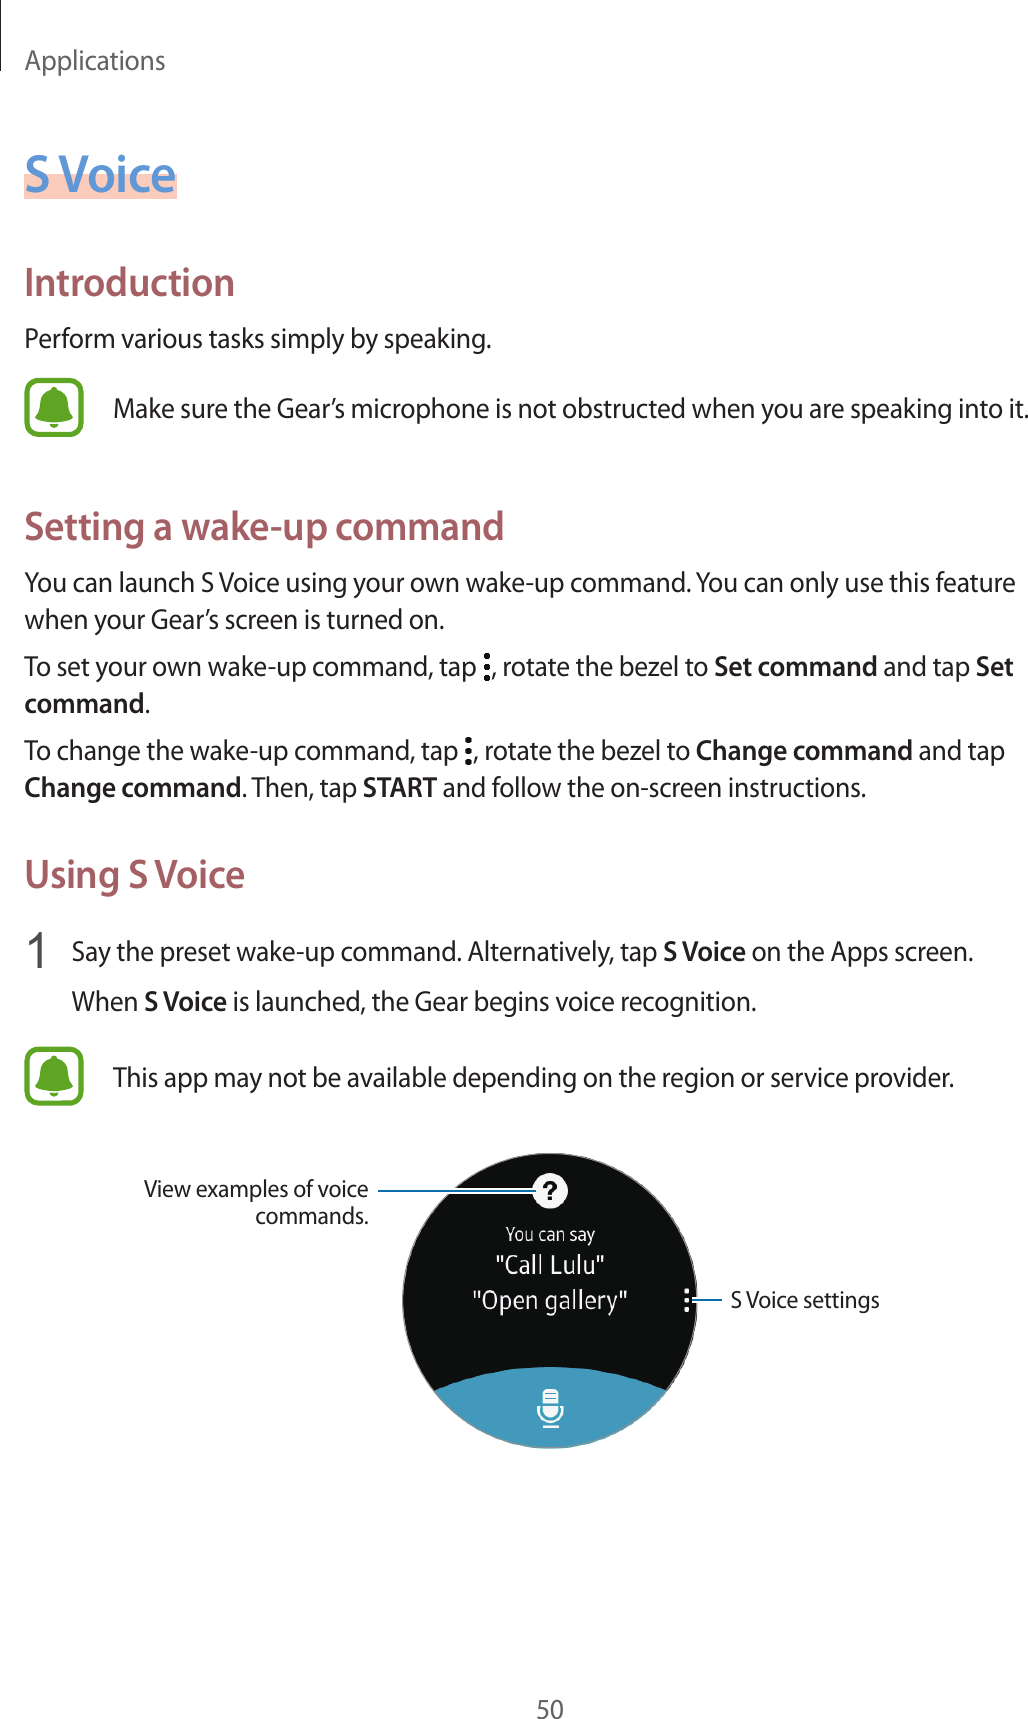 Applications50S VoiceIntroductionPerform various tasks simply by speaking.Make sure the Gear’s microphone is not obstructed when you are speaking into it.Setting a wake-up commandYou can launch S Voice using your own wake-up command. You can only use this feature when your Gear’s screen is turned on.To set your own wake-up command, tap  , rotate the bezel to Set command and tap Set command.To change the wake-up command, tap  , rotate the bezel to Change command and tap Change command. Then, tap START and follow the on-screen instructions.Using S Voice1  Say the preset wake-up command. Alternatively, tap S Voice on the Apps screen.When S Voice is launched, the Gear begins voice recognition.This app may not be available depending on the region or service provider.S Voice settingsView examples of voice commands.